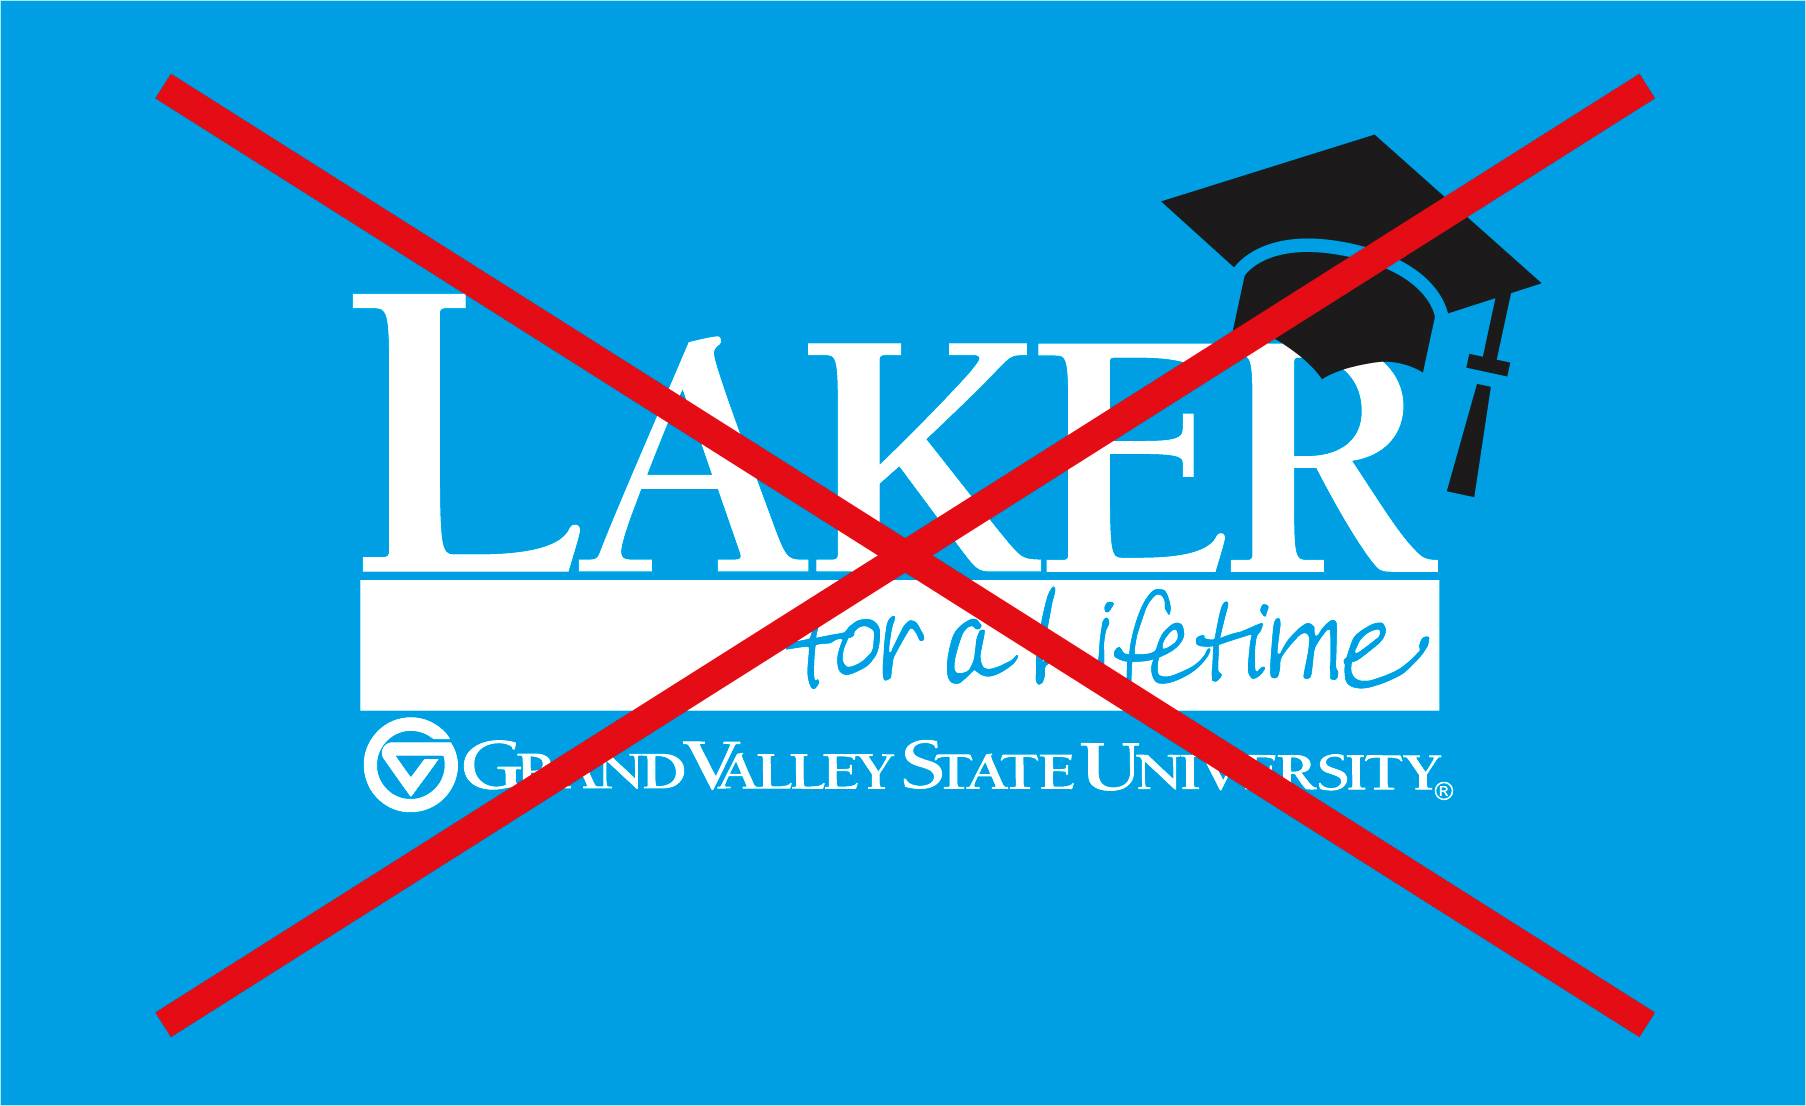 Laker for a Lifetime text treatment with a graduation cap on top of the "R" in "Laker". A red X overlays the image.